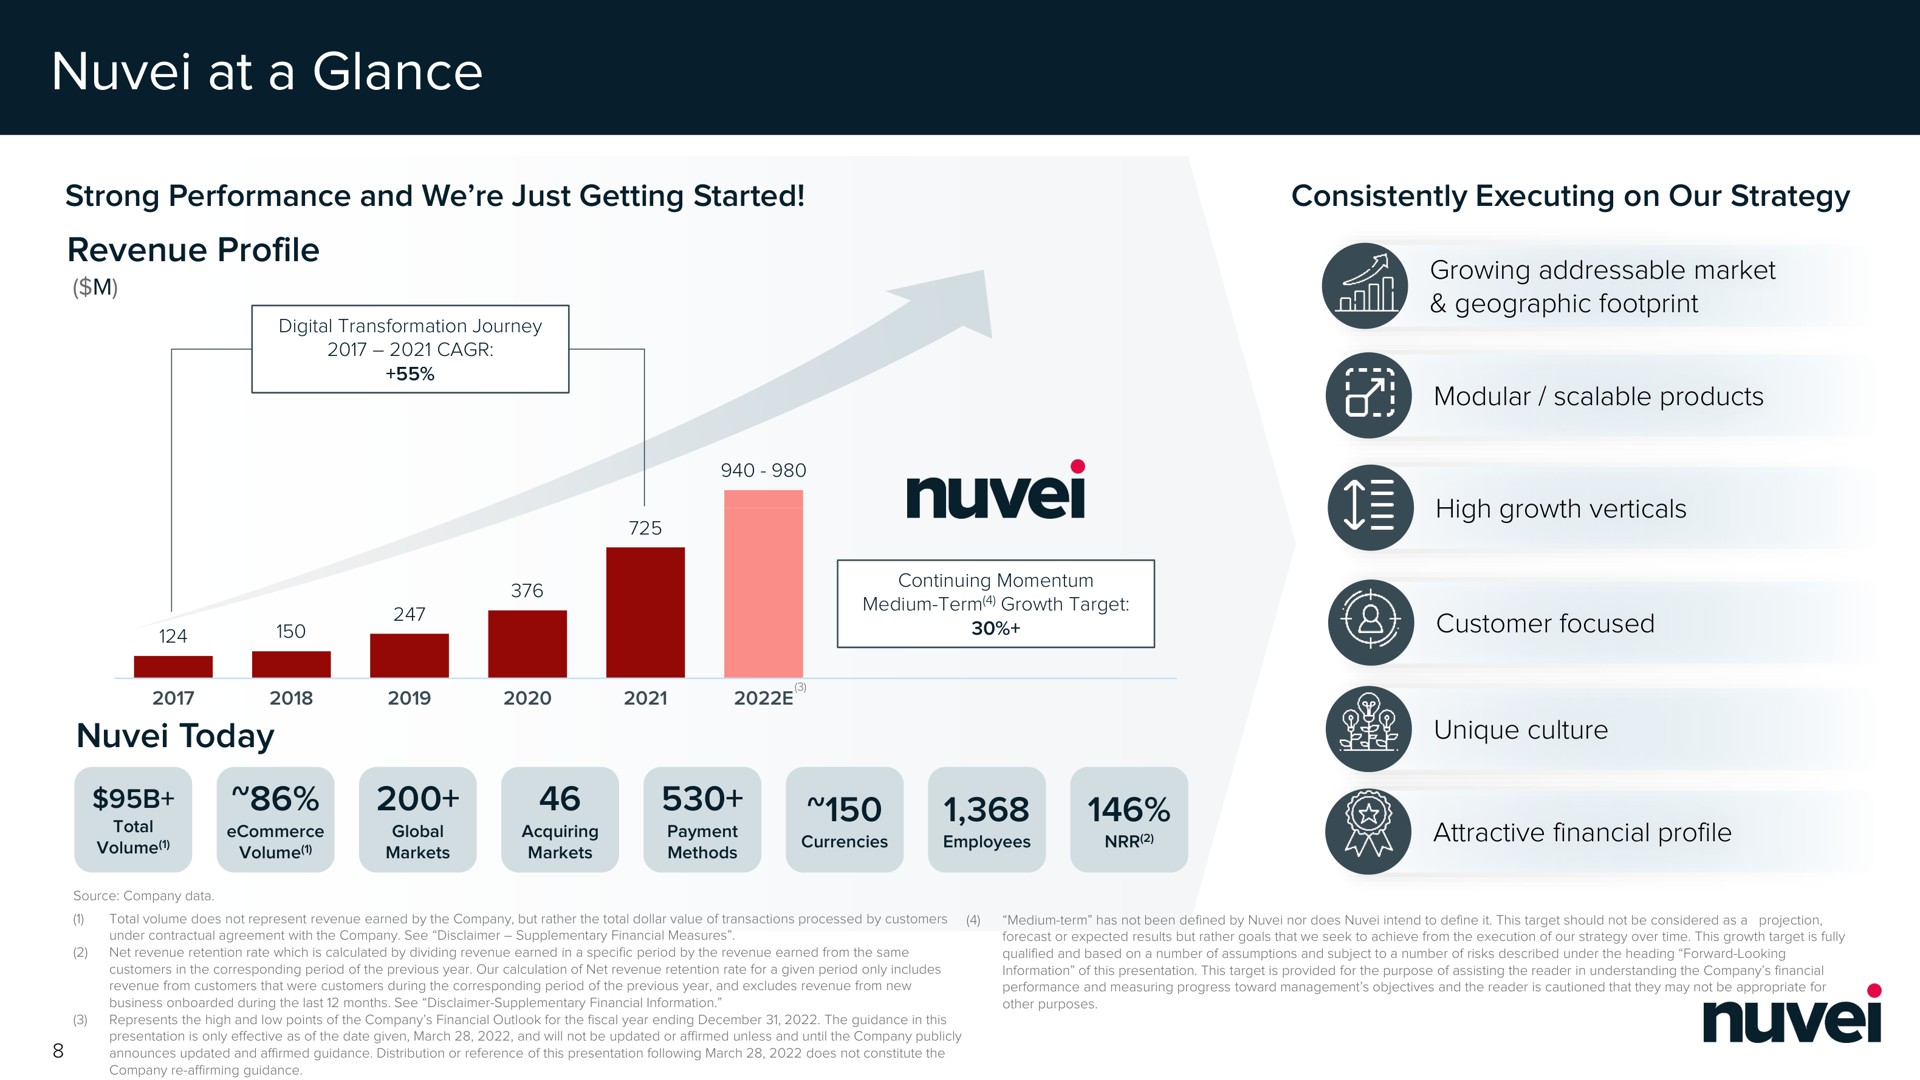 at a glance | Nuvei